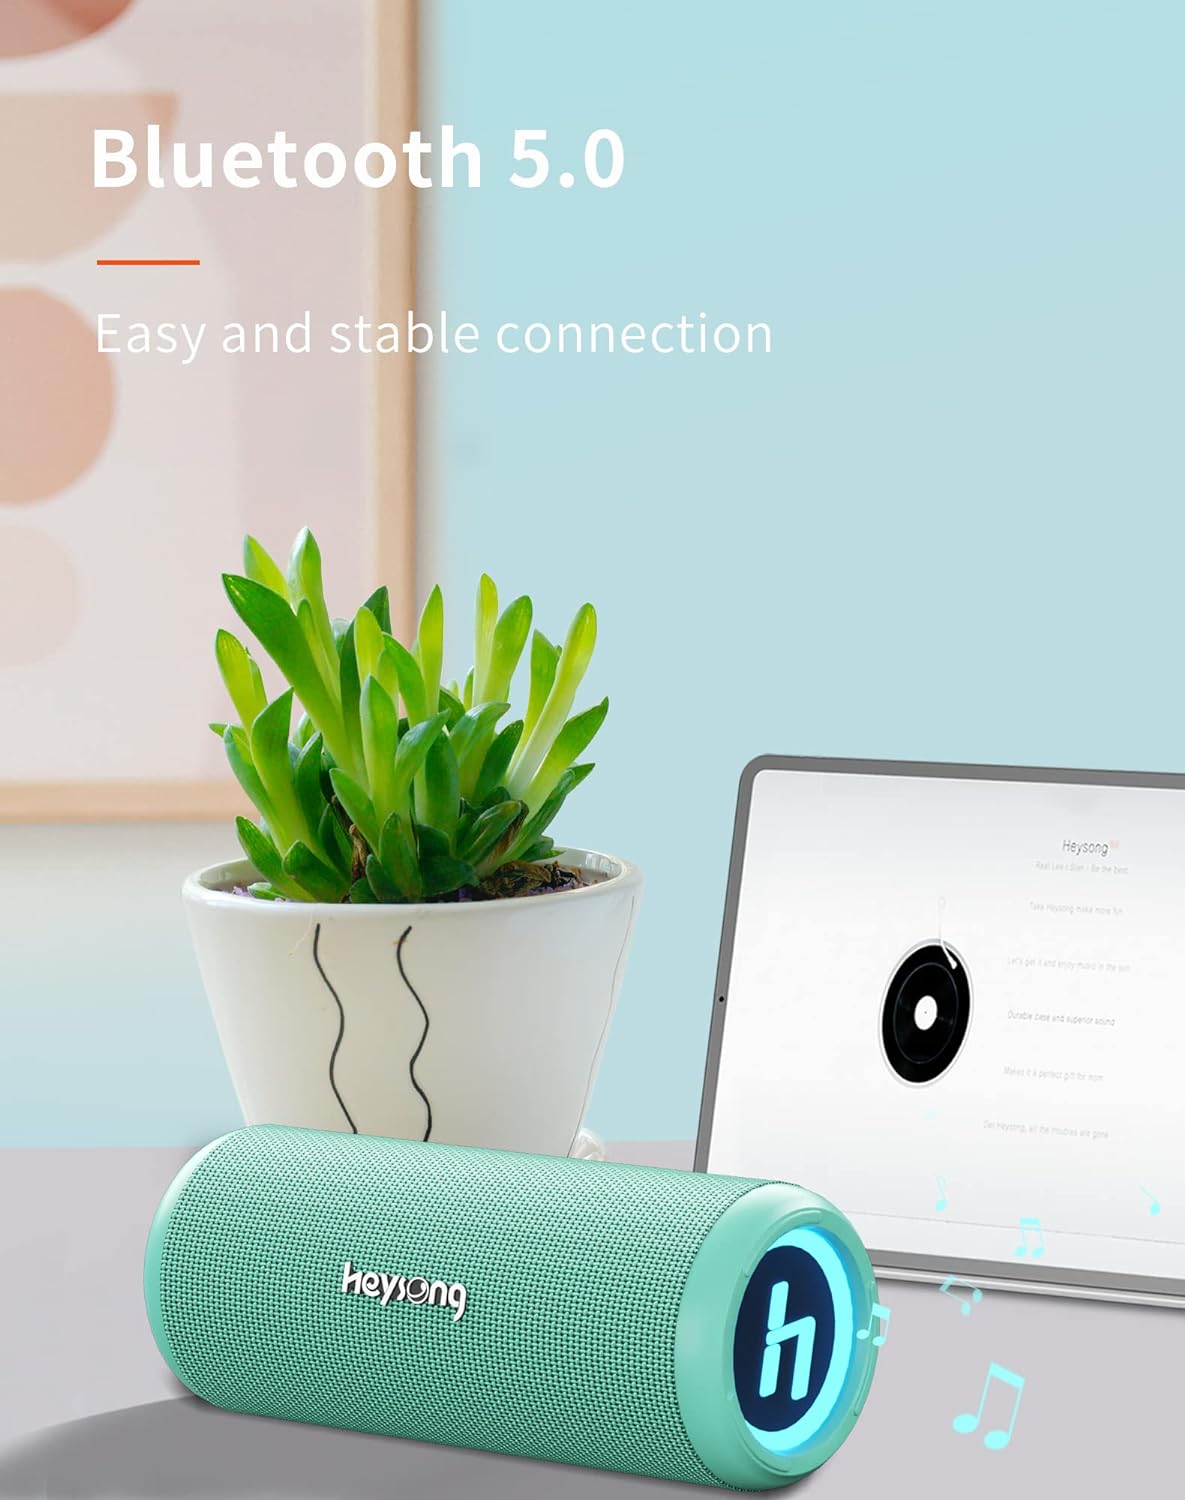 HEYSONG Bluetooth Speaker, Waterproof Portable Wireless Bluetooth Speakers with Led Light, 20W Loud Sound, TF Card, USB Playback, Pool Accessories for Kayak, Boat, Outdoor, Camping, Gifts for Men